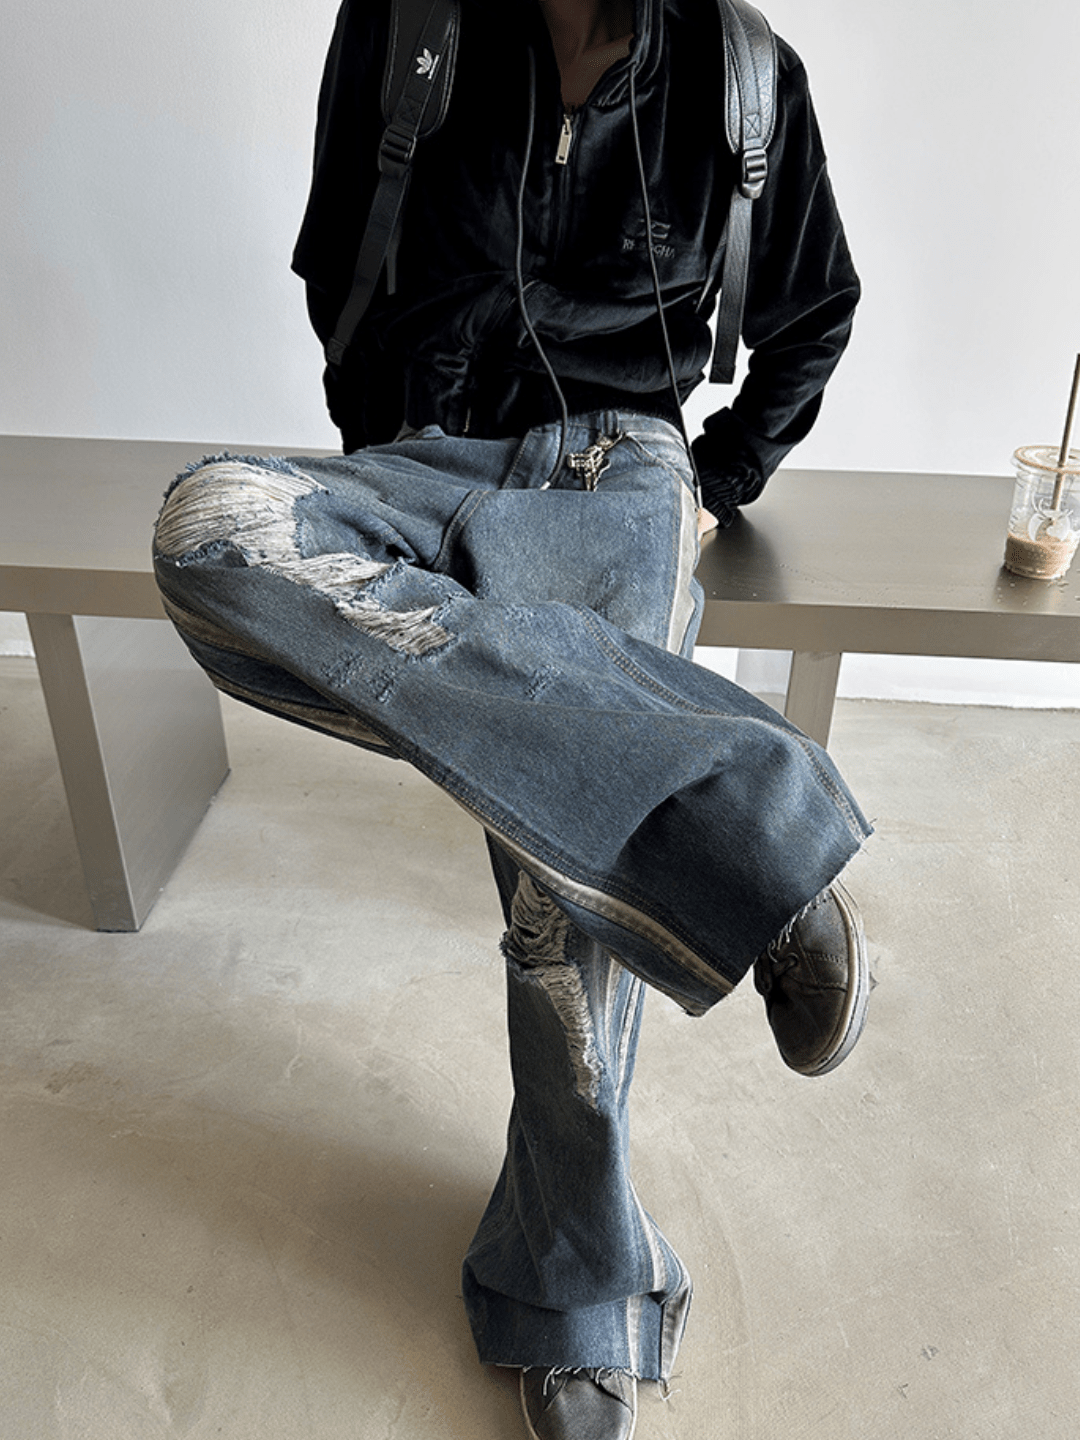 [GENESISBOY] washed ripped jeans na981